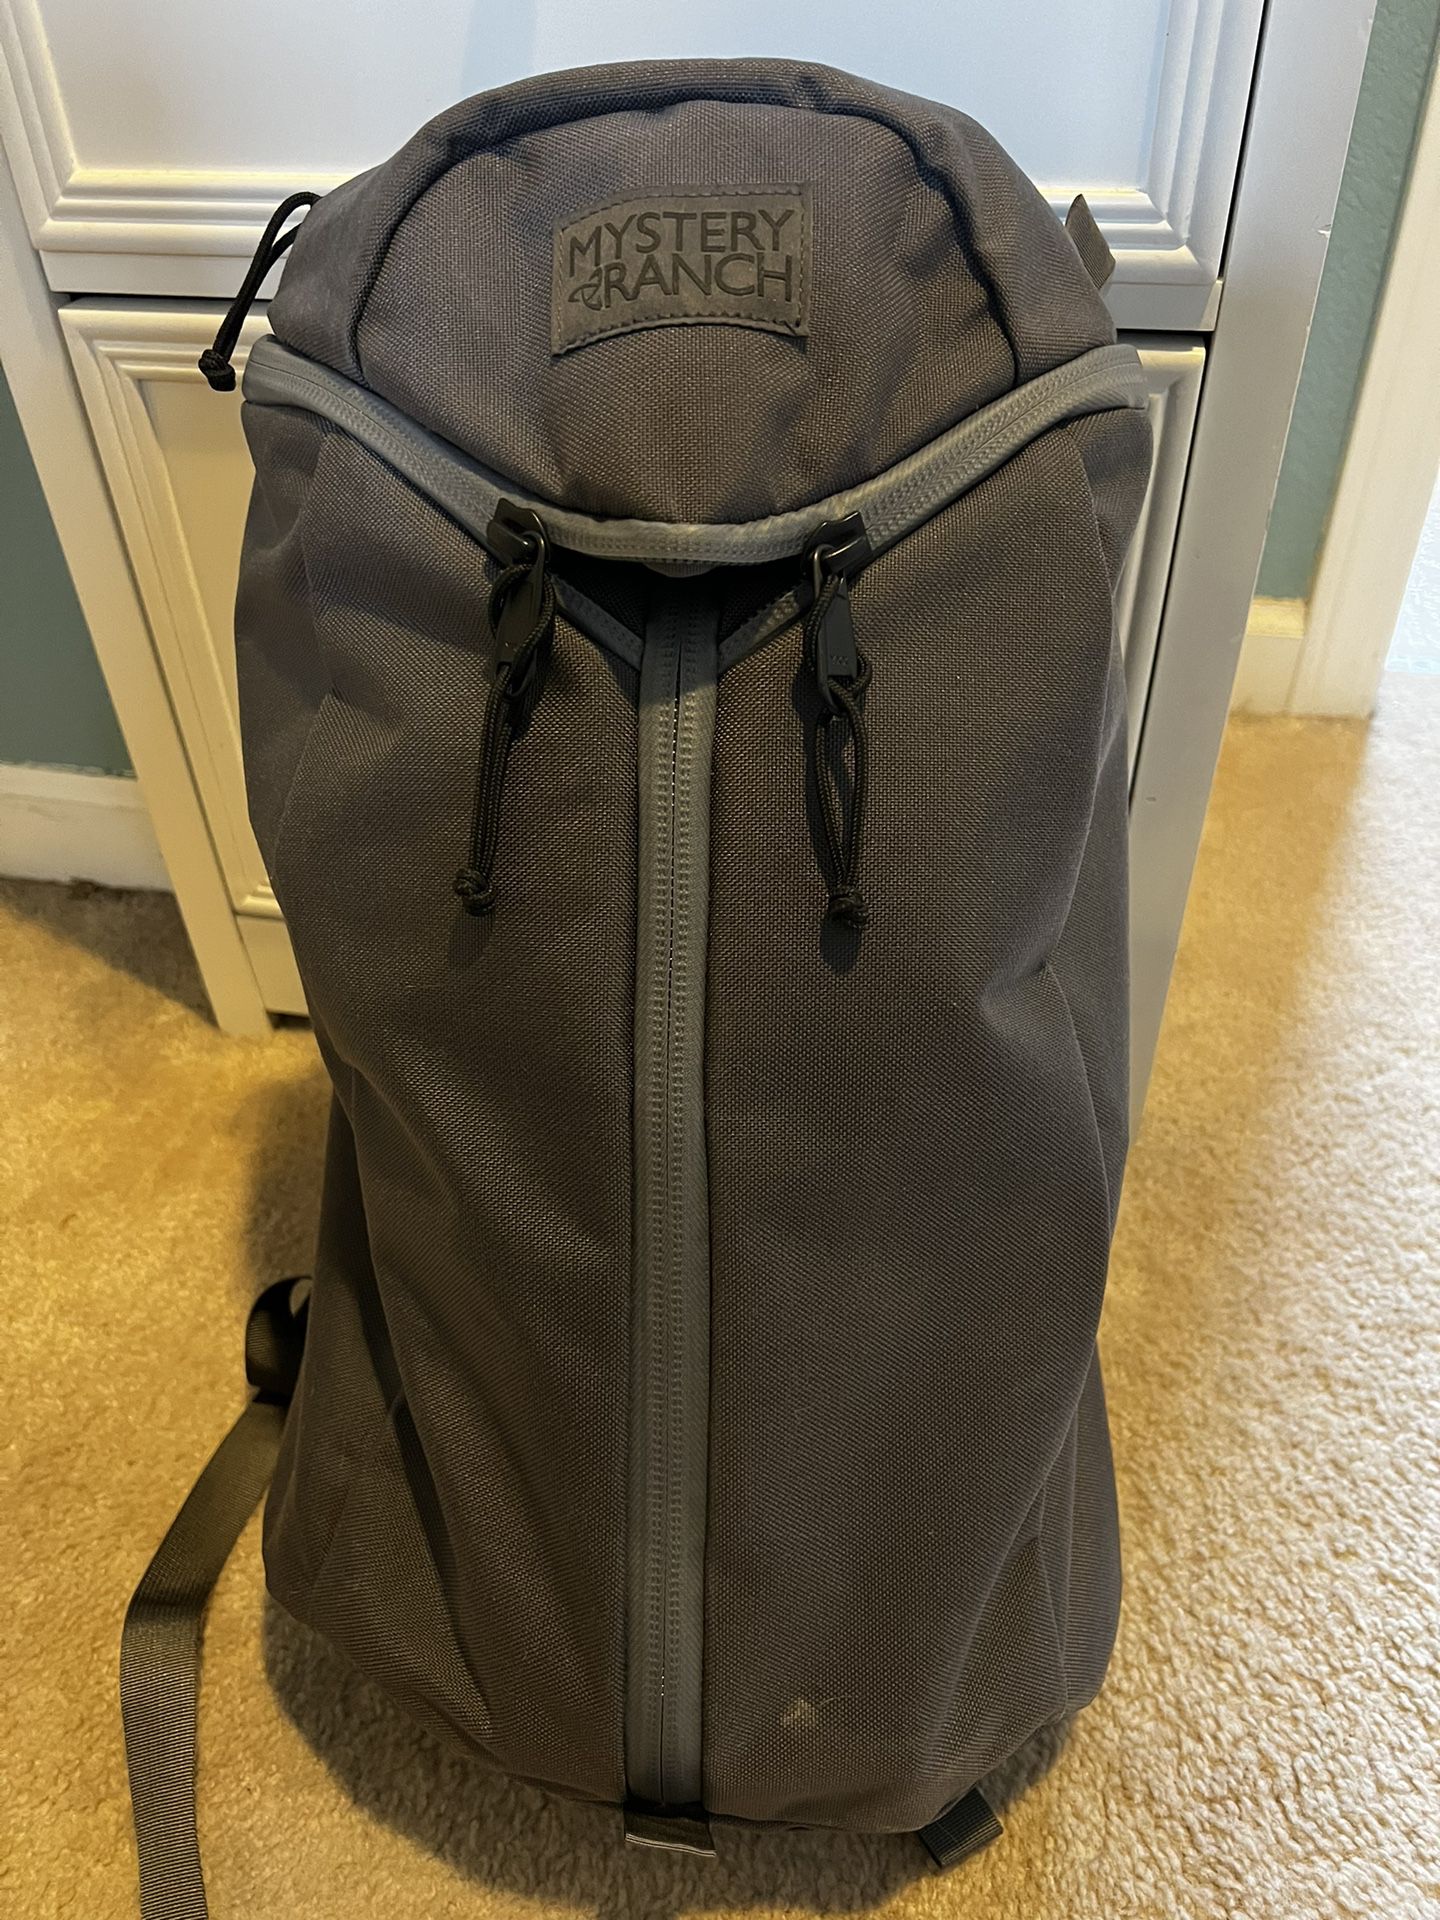 Mystery Ranch 21L Urban Assault Backpack